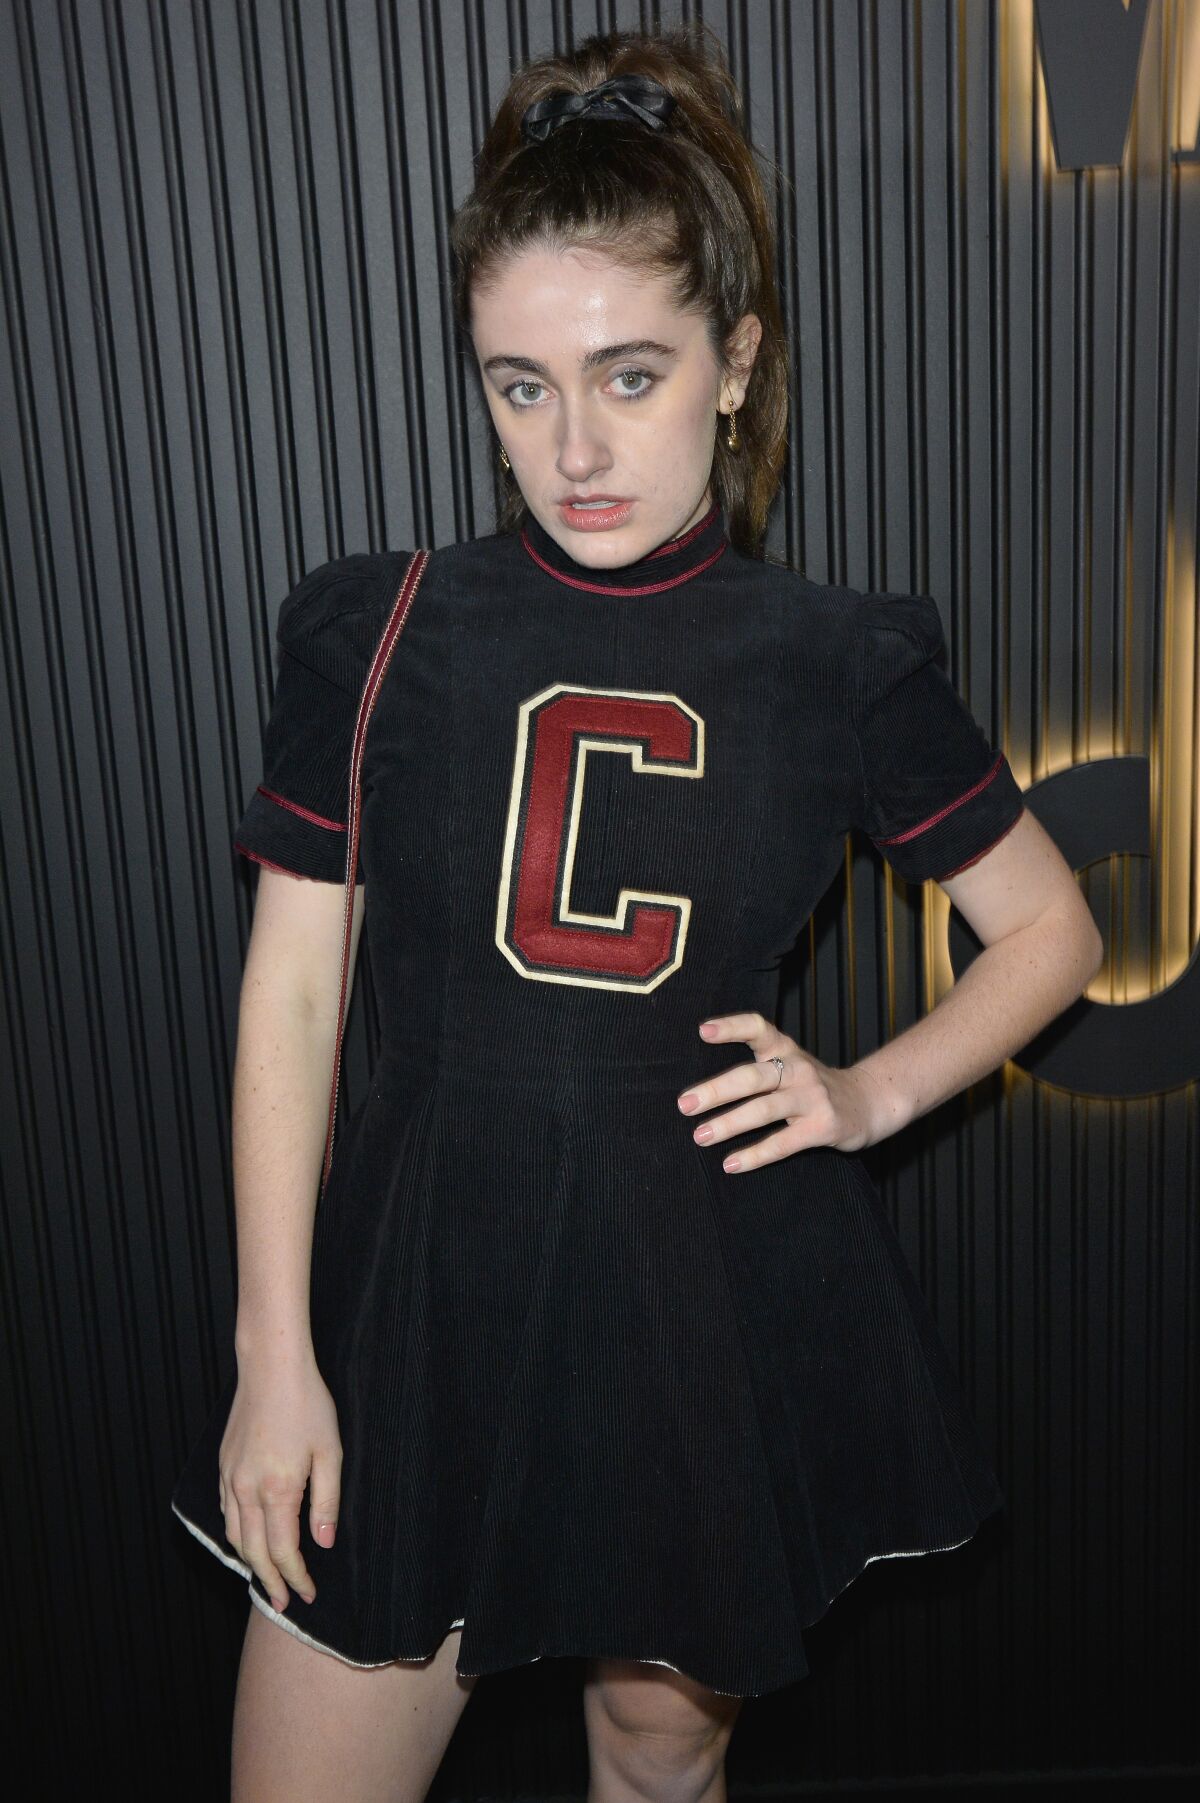 Rachel Sennott in a black outfit with a red C on the top and one hand on her waist.